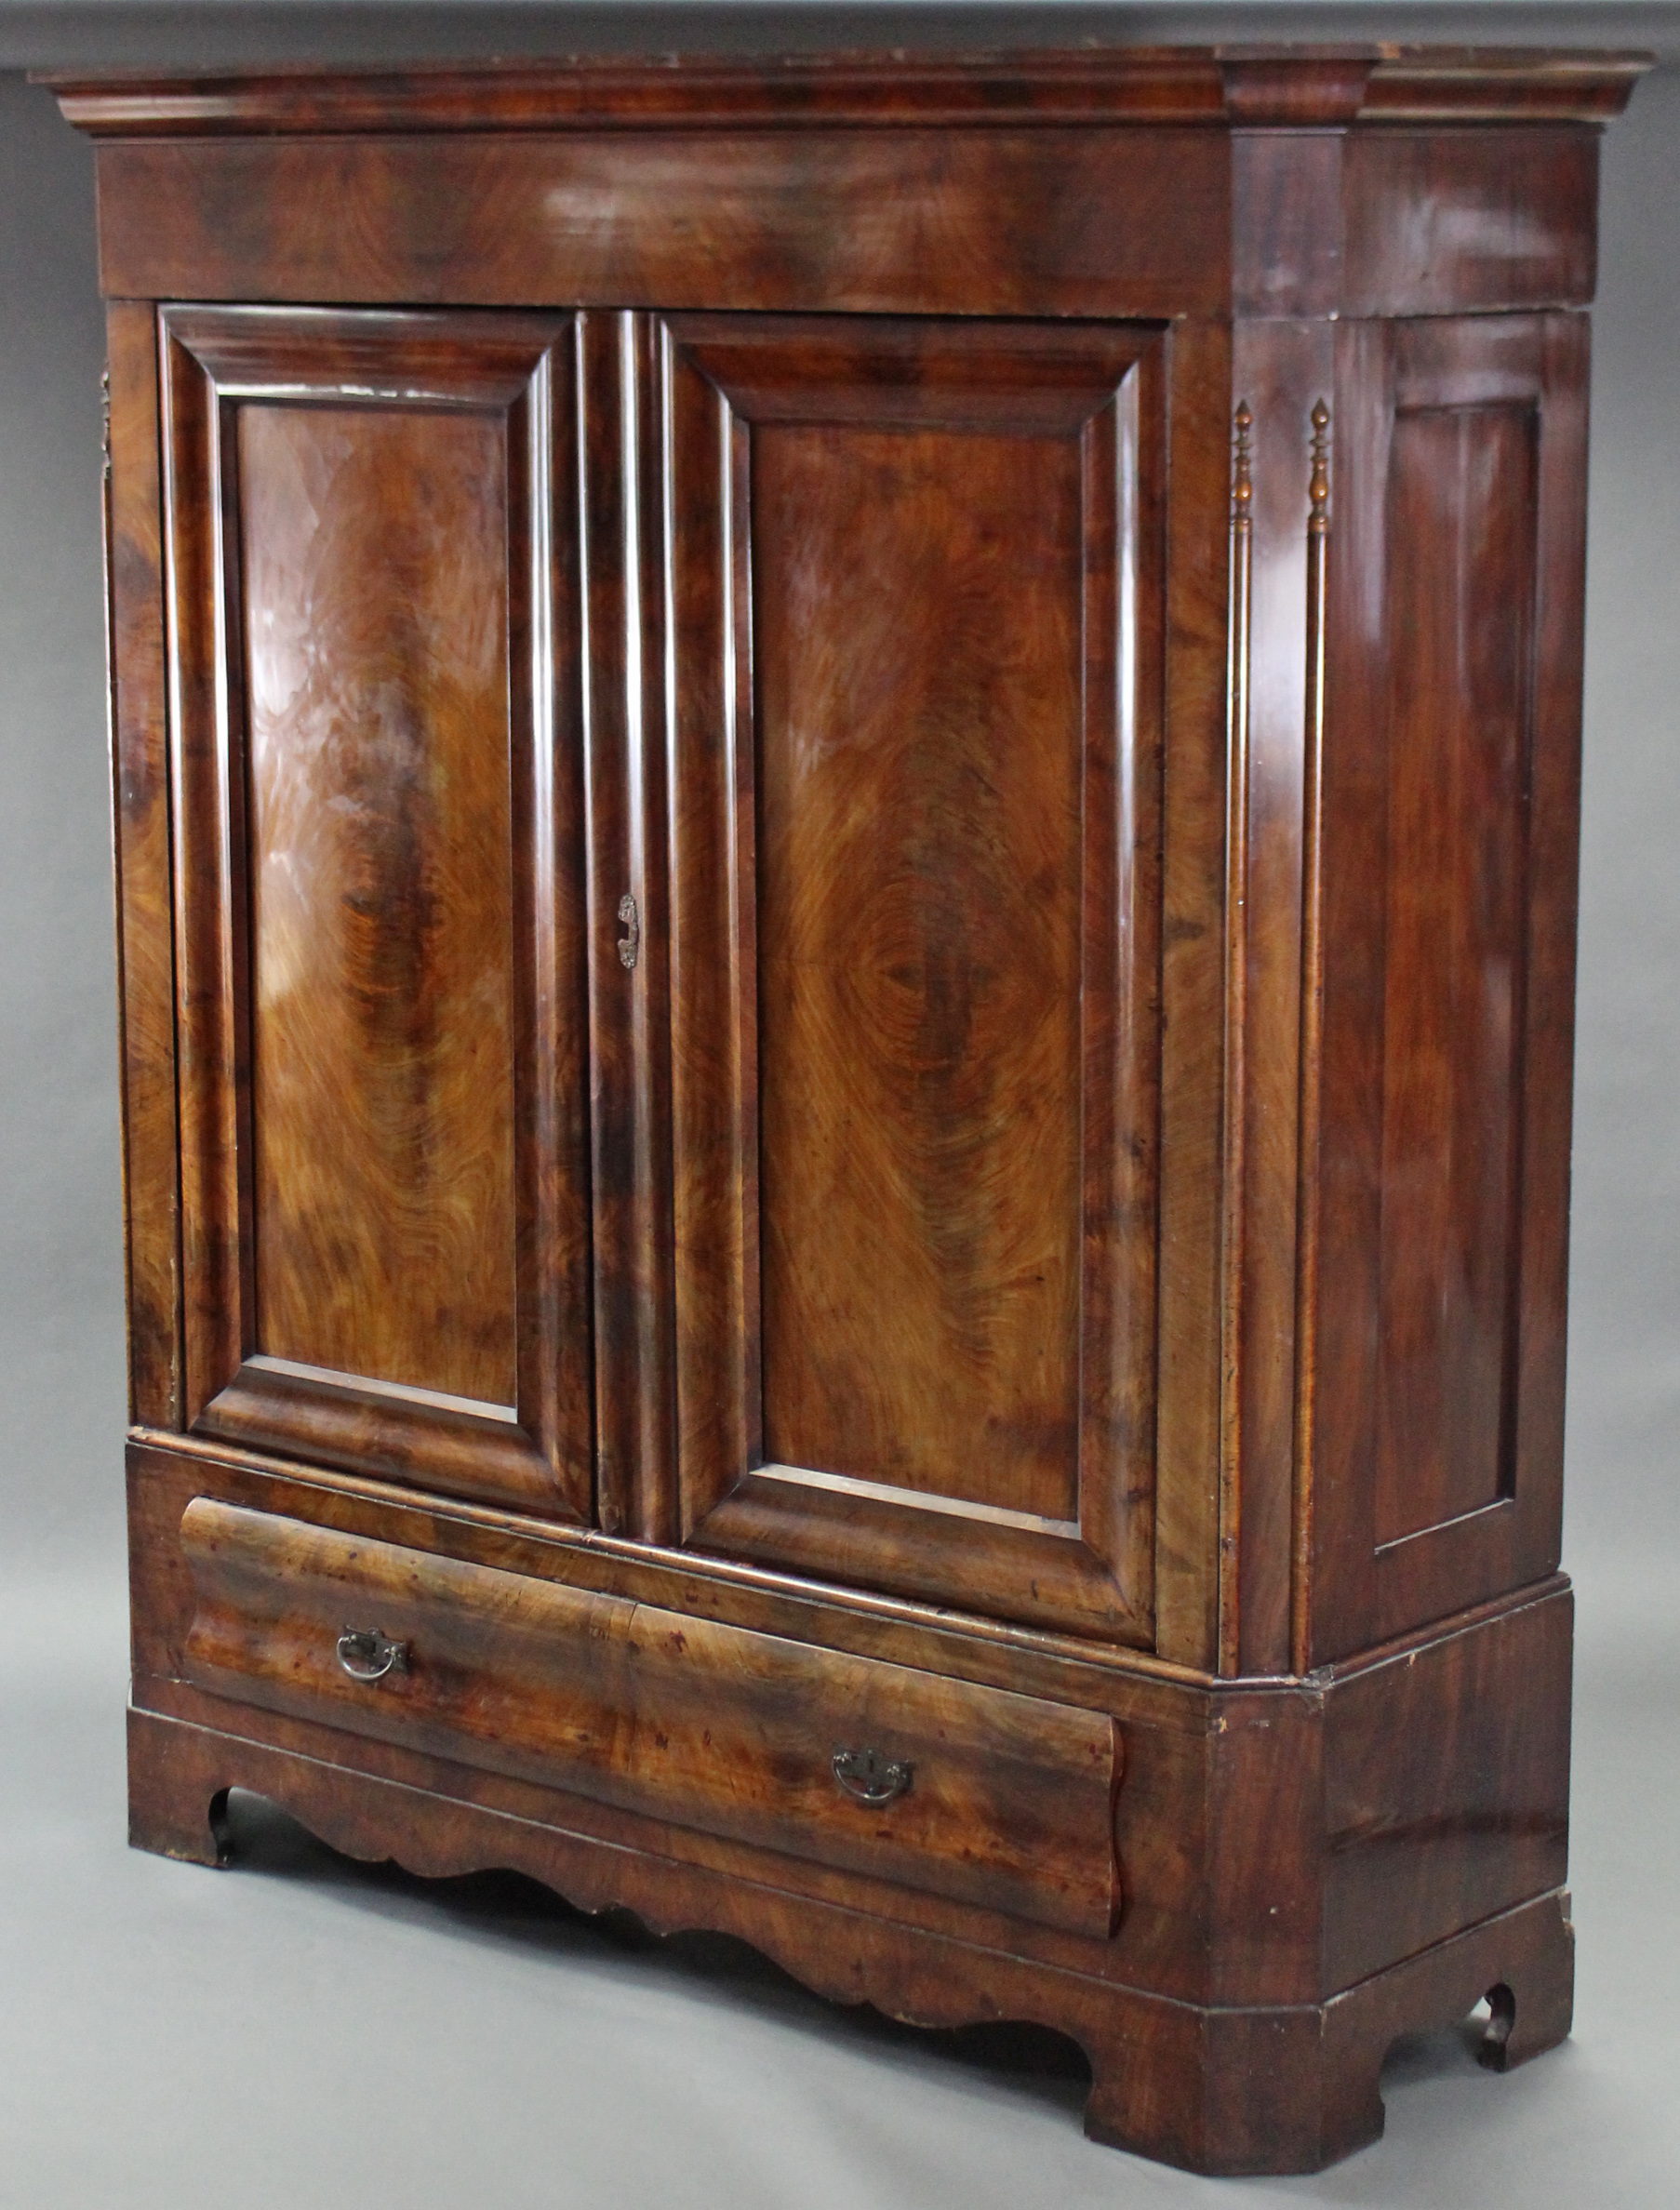 A 19th century CONTINENTAL FIGURED MAHOGANY WARDROBE, the upper part with cavetto cornice & enclosed